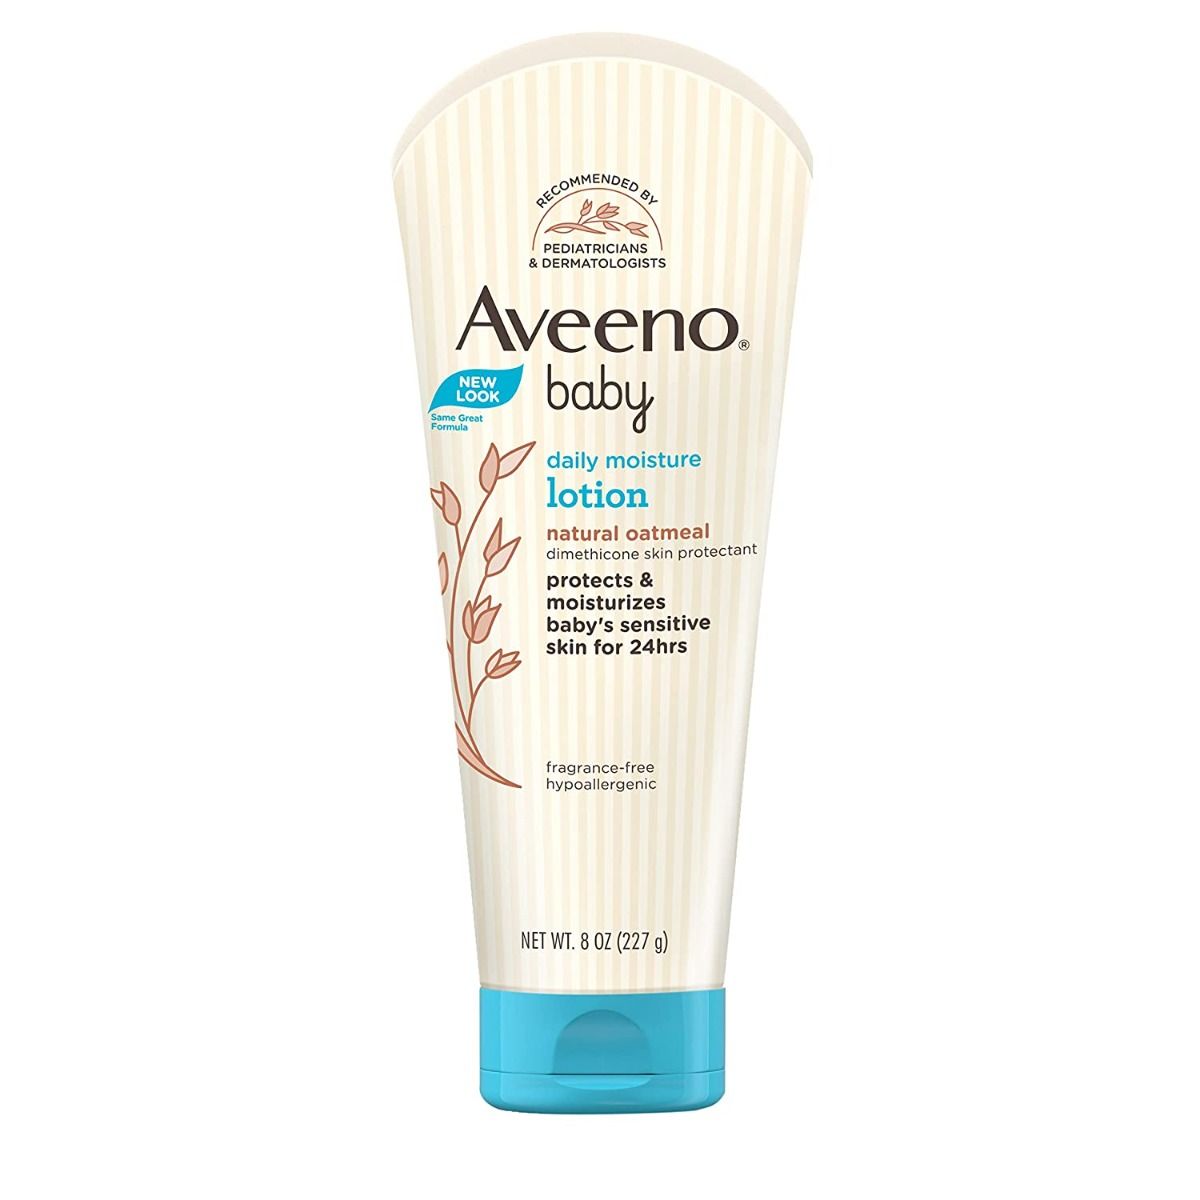 Aveeno Baby Daily Moisture Lotion, 227 gm, Pack of 1 